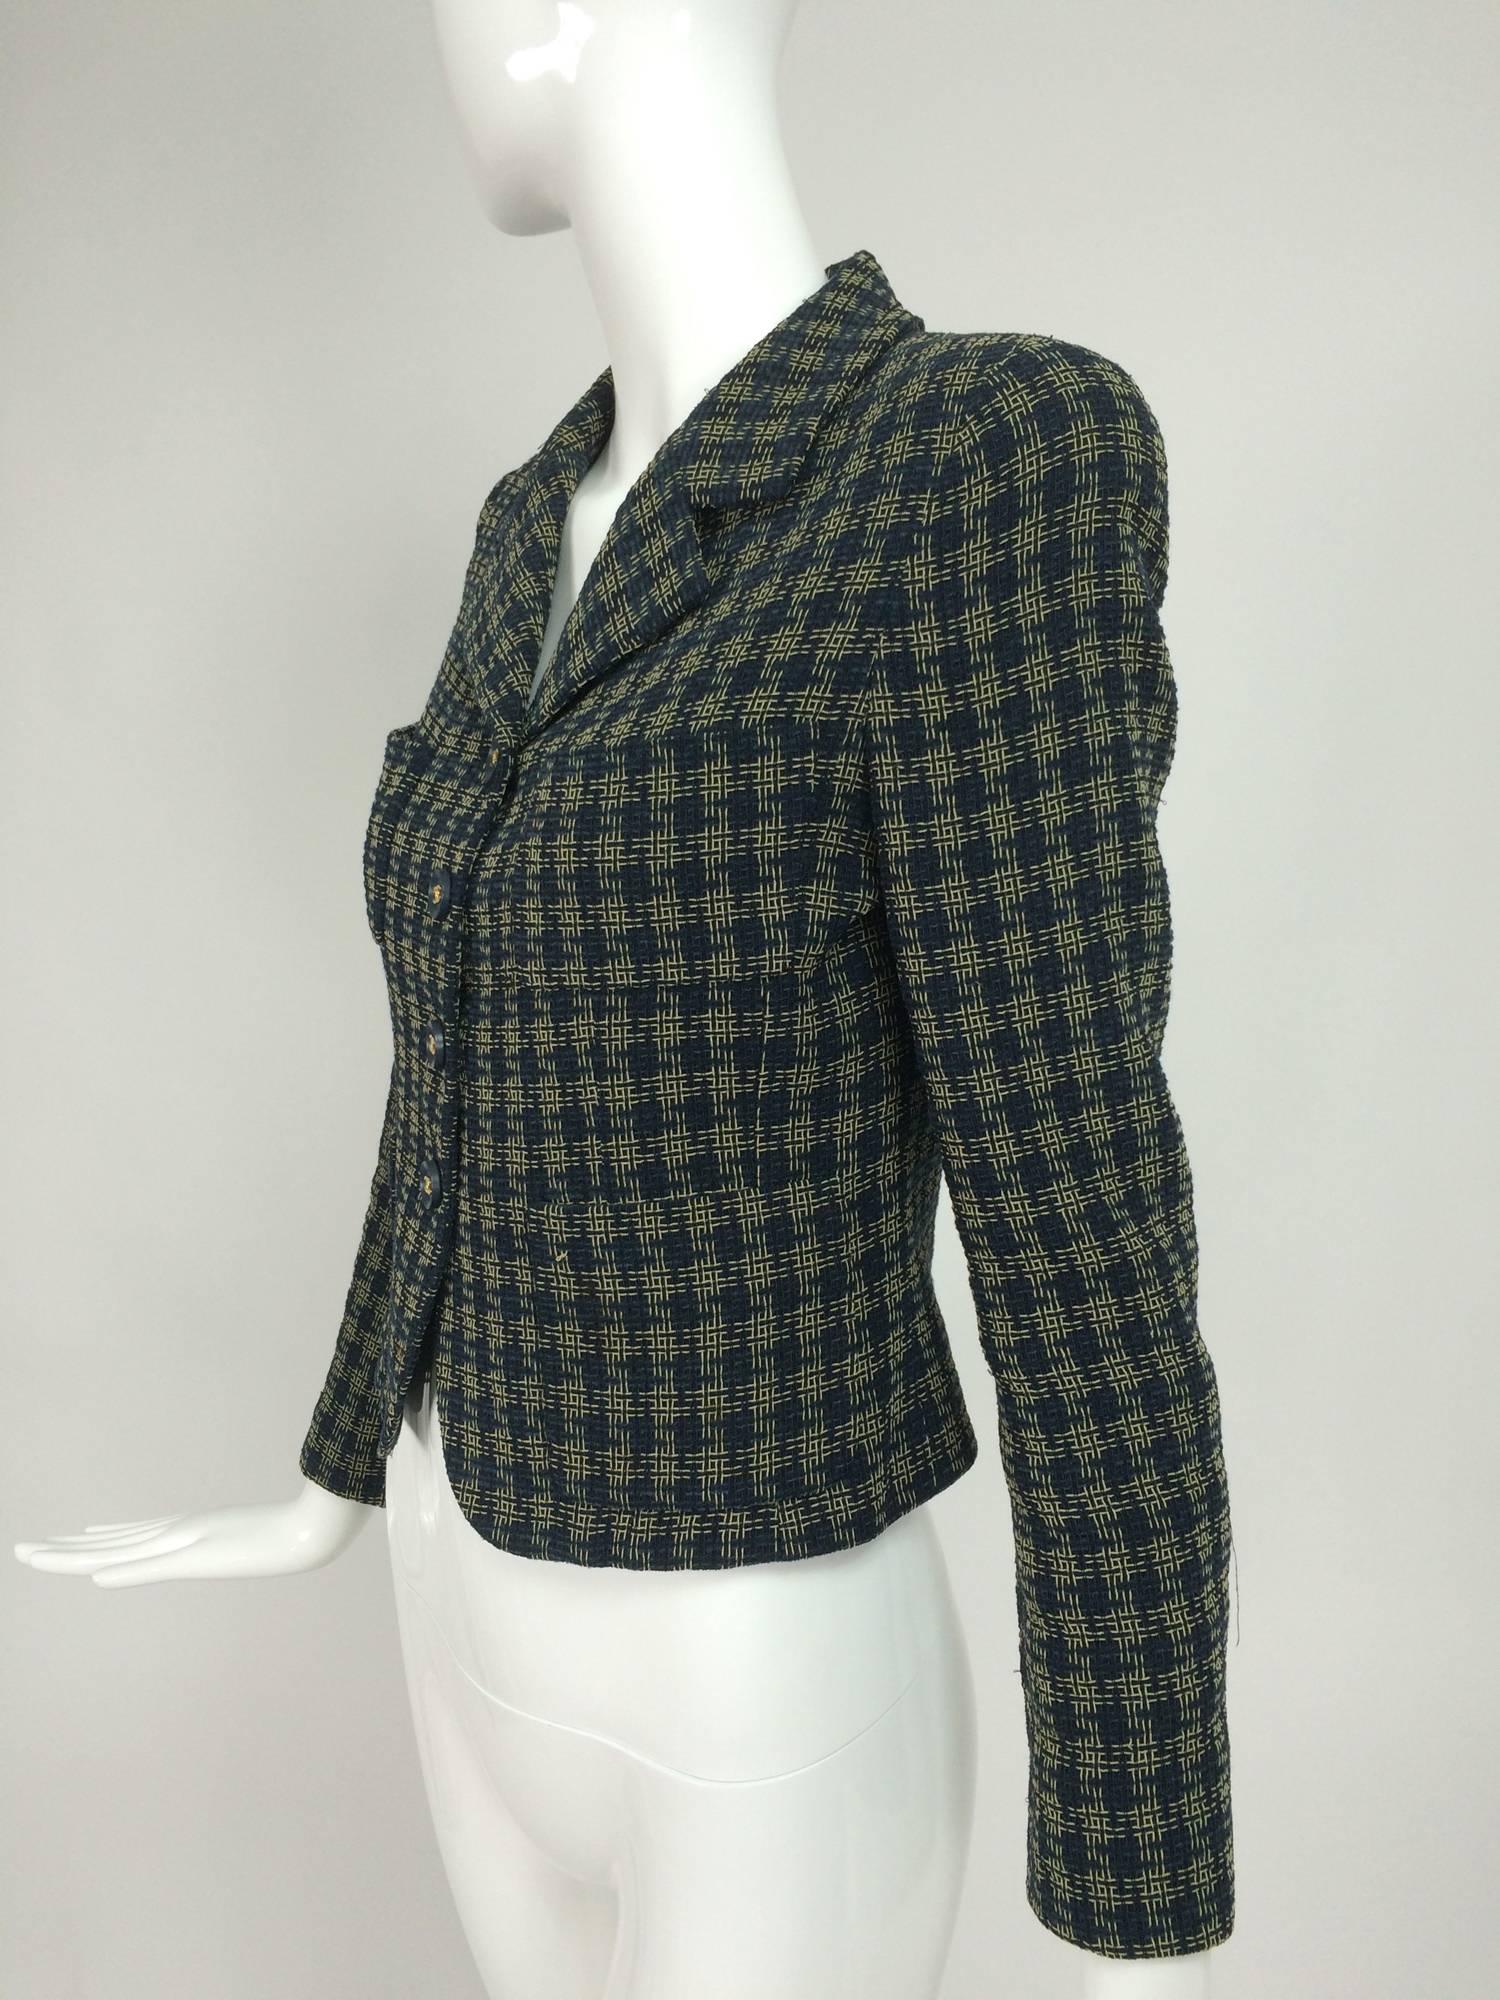 Chanel navy & cream open weave check cropped jacket...Button front jacket with 4 patch pockets...Long sleeves with button trim cuffs...Fully lined...Marked size 36, fits like an XS-S

In excellent wearable condition... All our clothing is dry